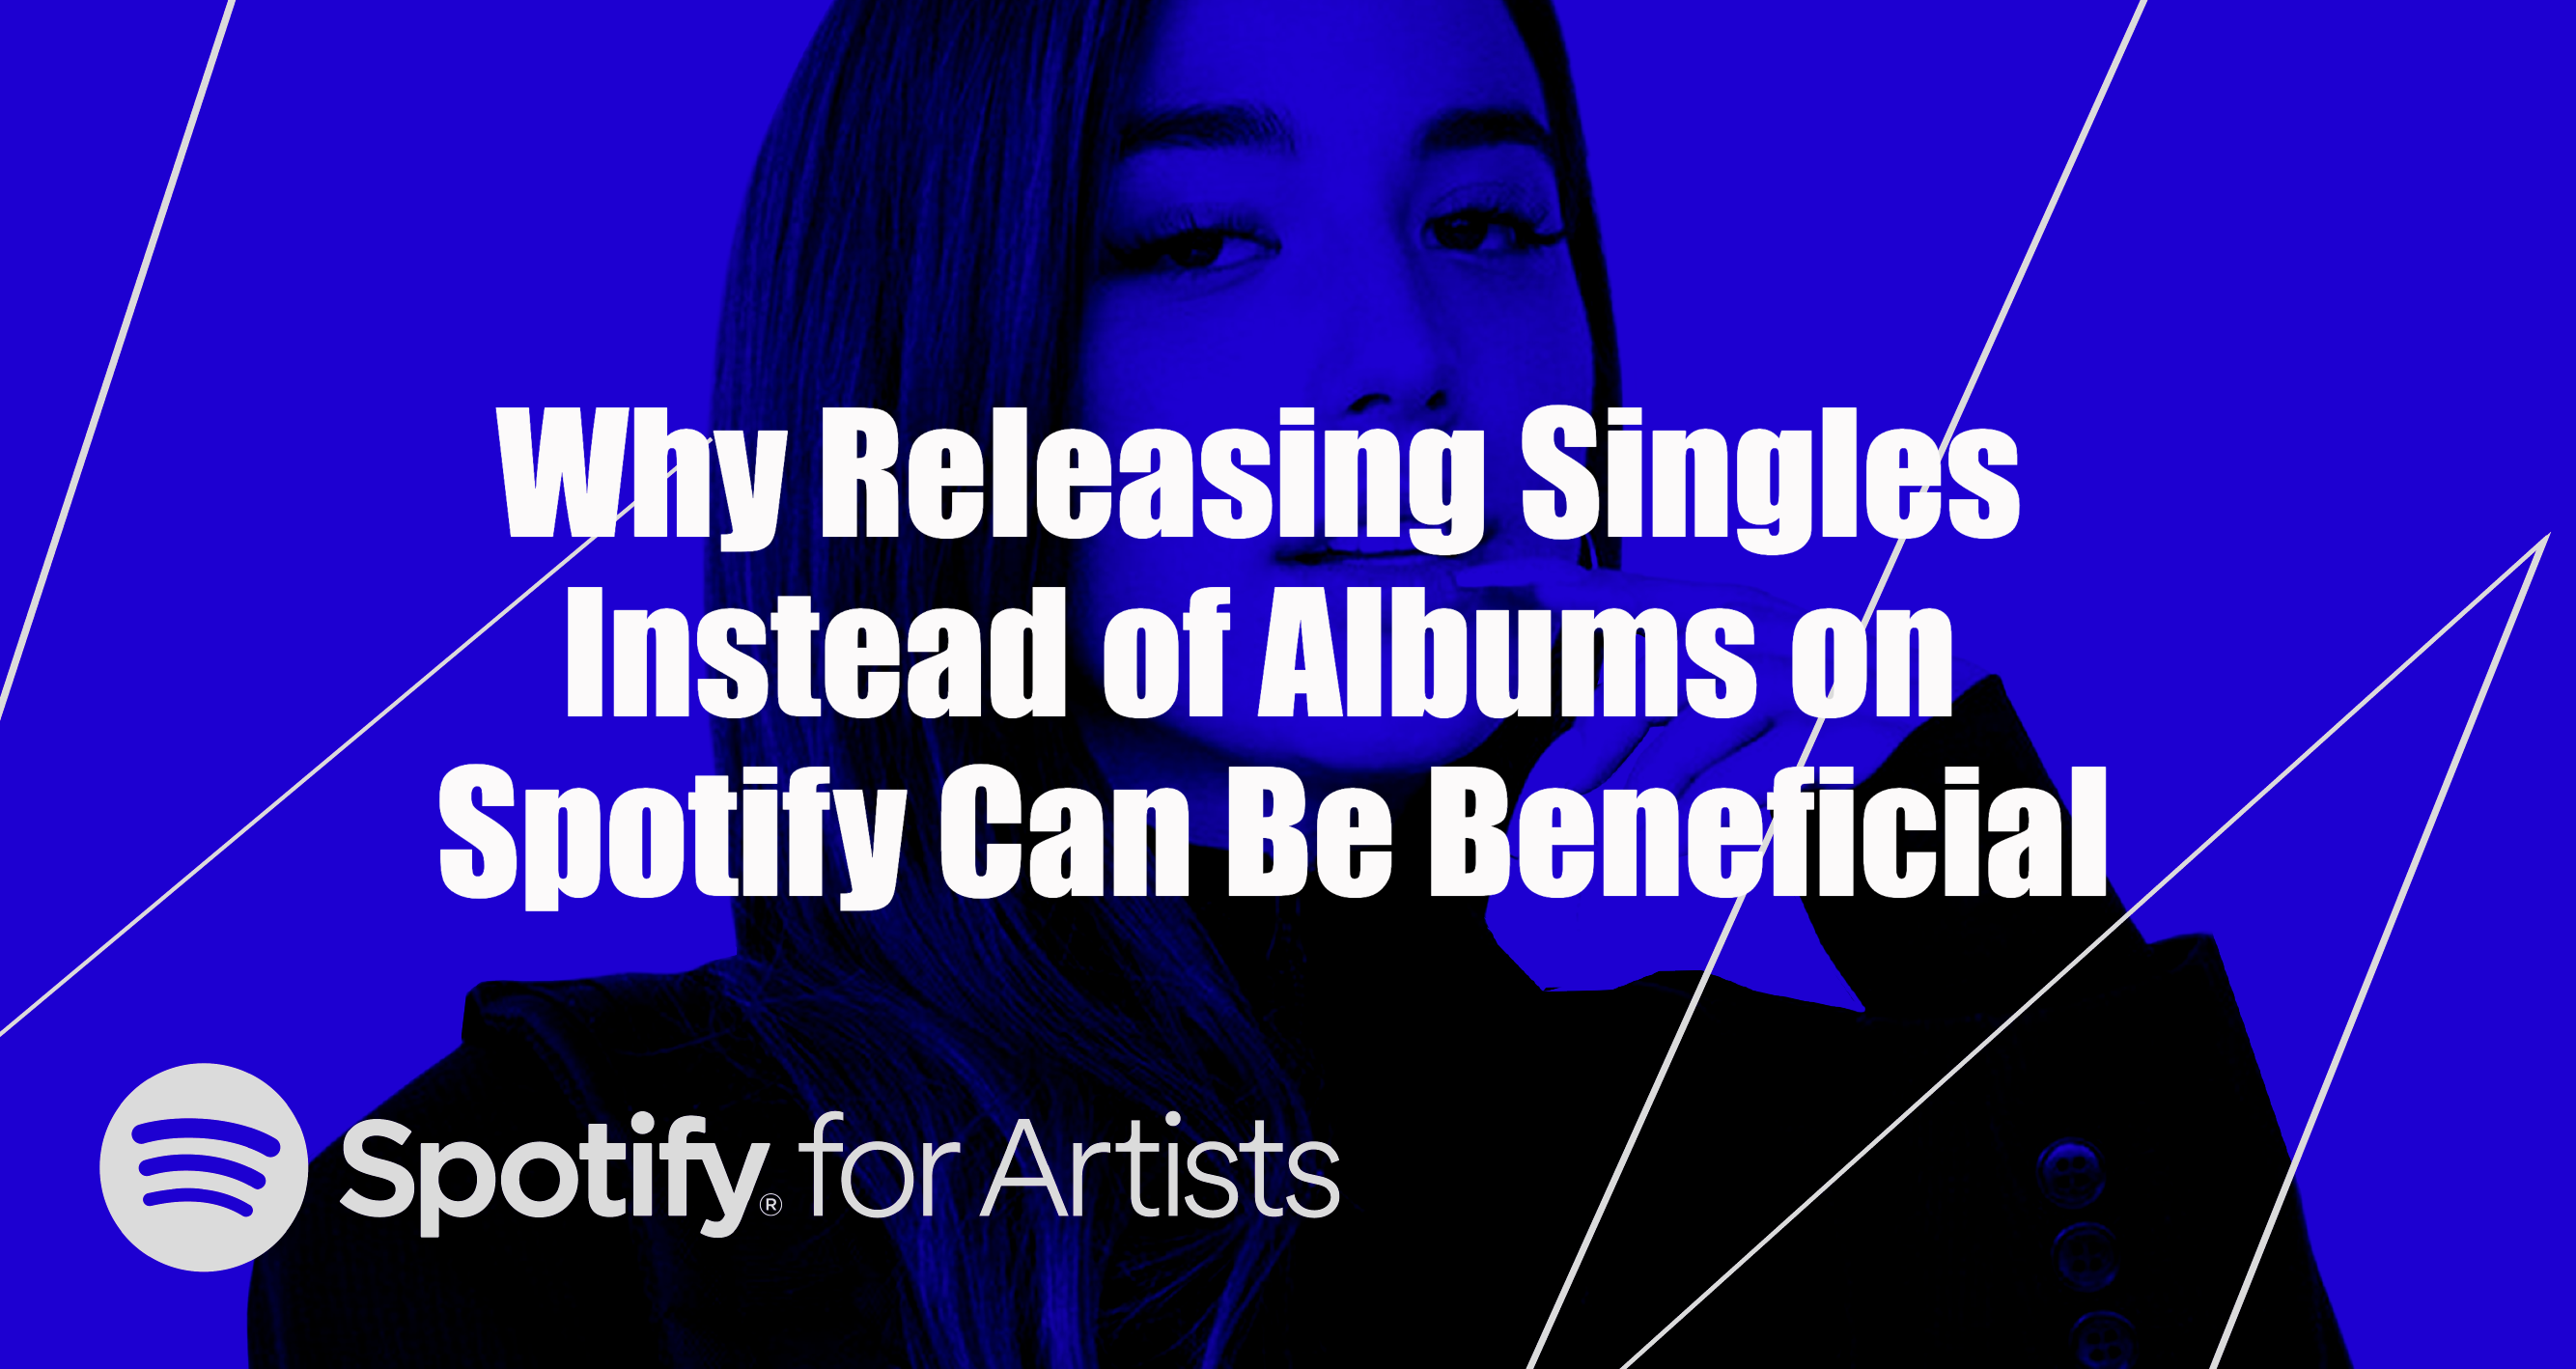 Why Releasing Singles Instead of Albums on Spotify Can Be Beneficial